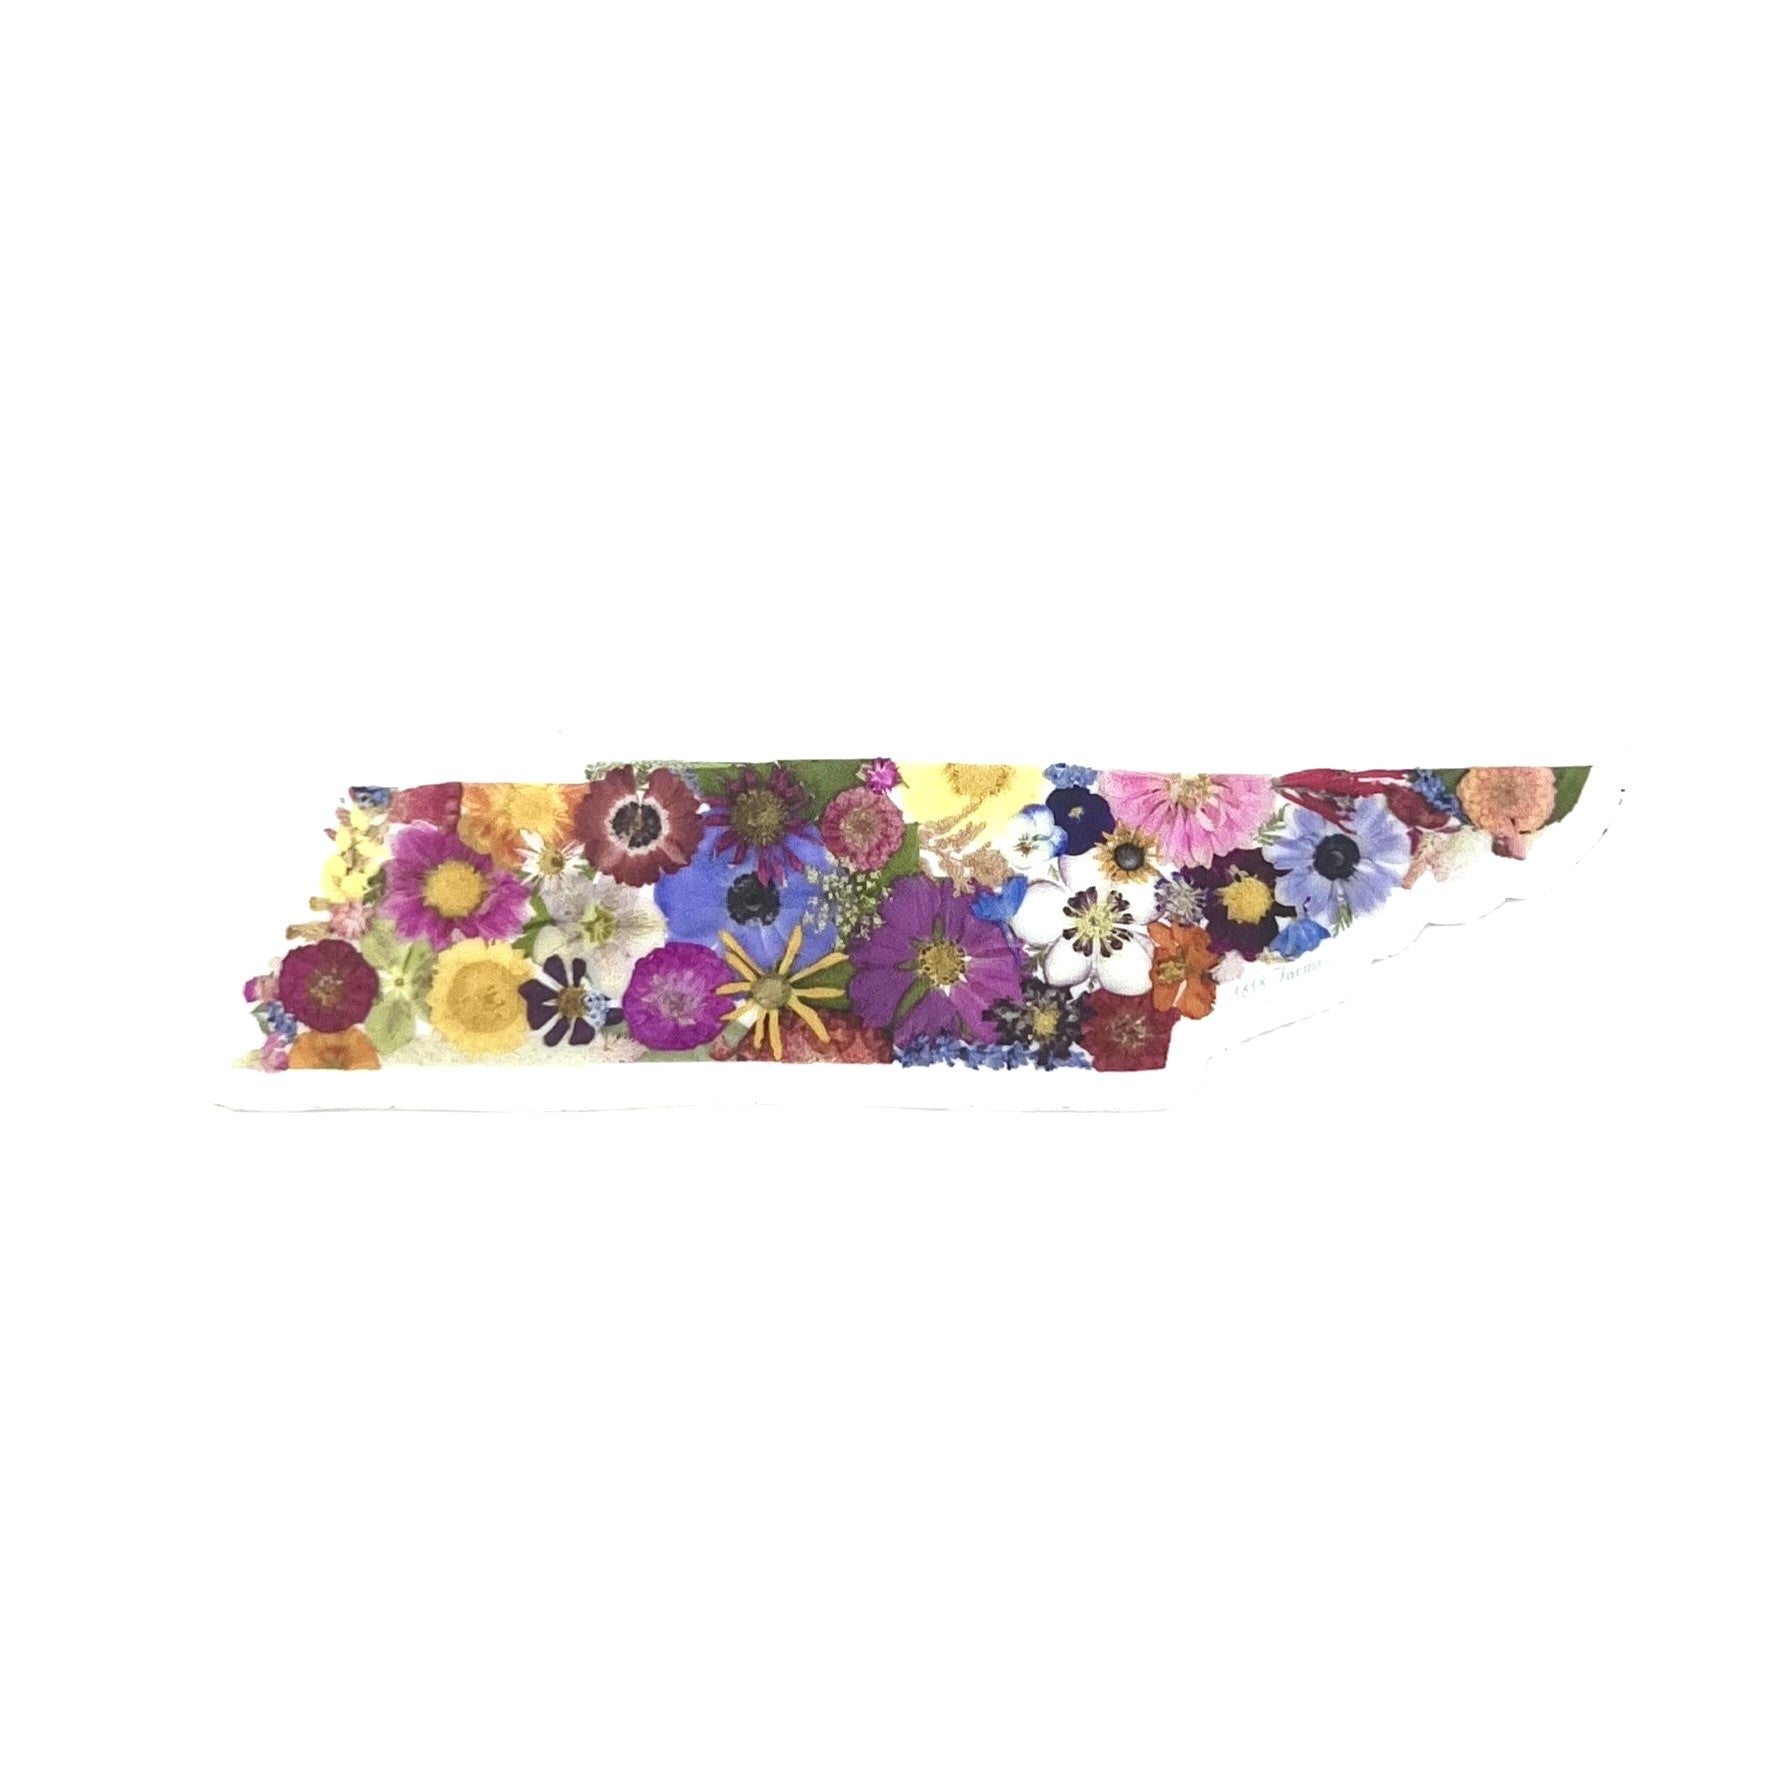 Tennessee Themed Vinyl Sticker Featuring Dried, Pressed Flowers - "Where I Bloom" Collection Vinyl Sticker 1818 Farms   